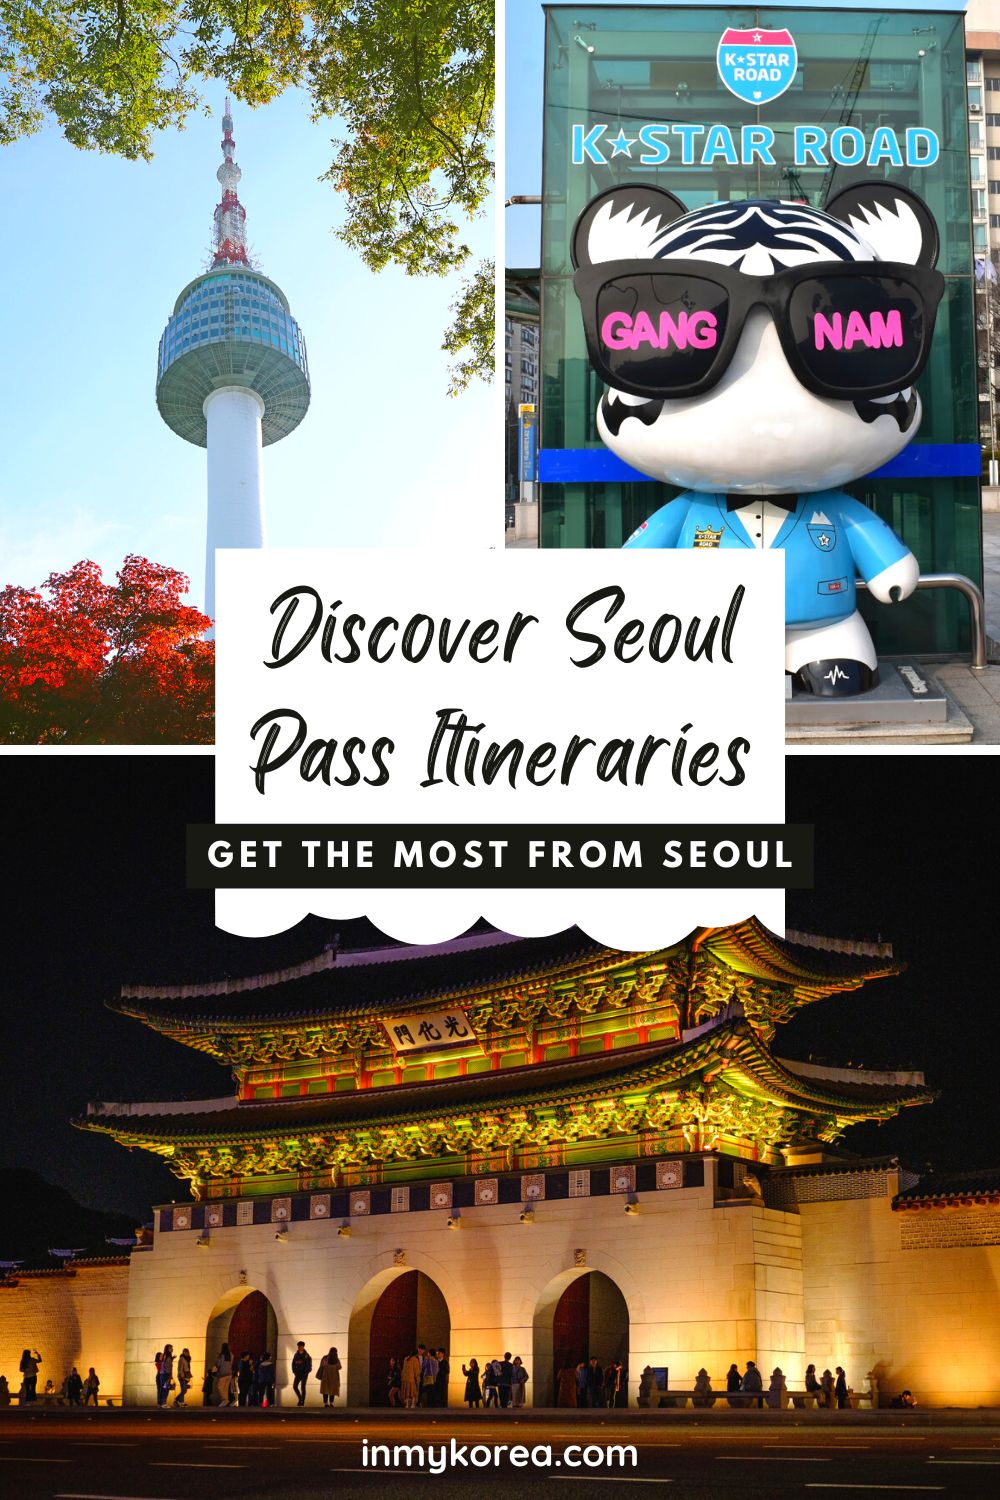 Discover Seoul Pass Itineraries Pin (1)